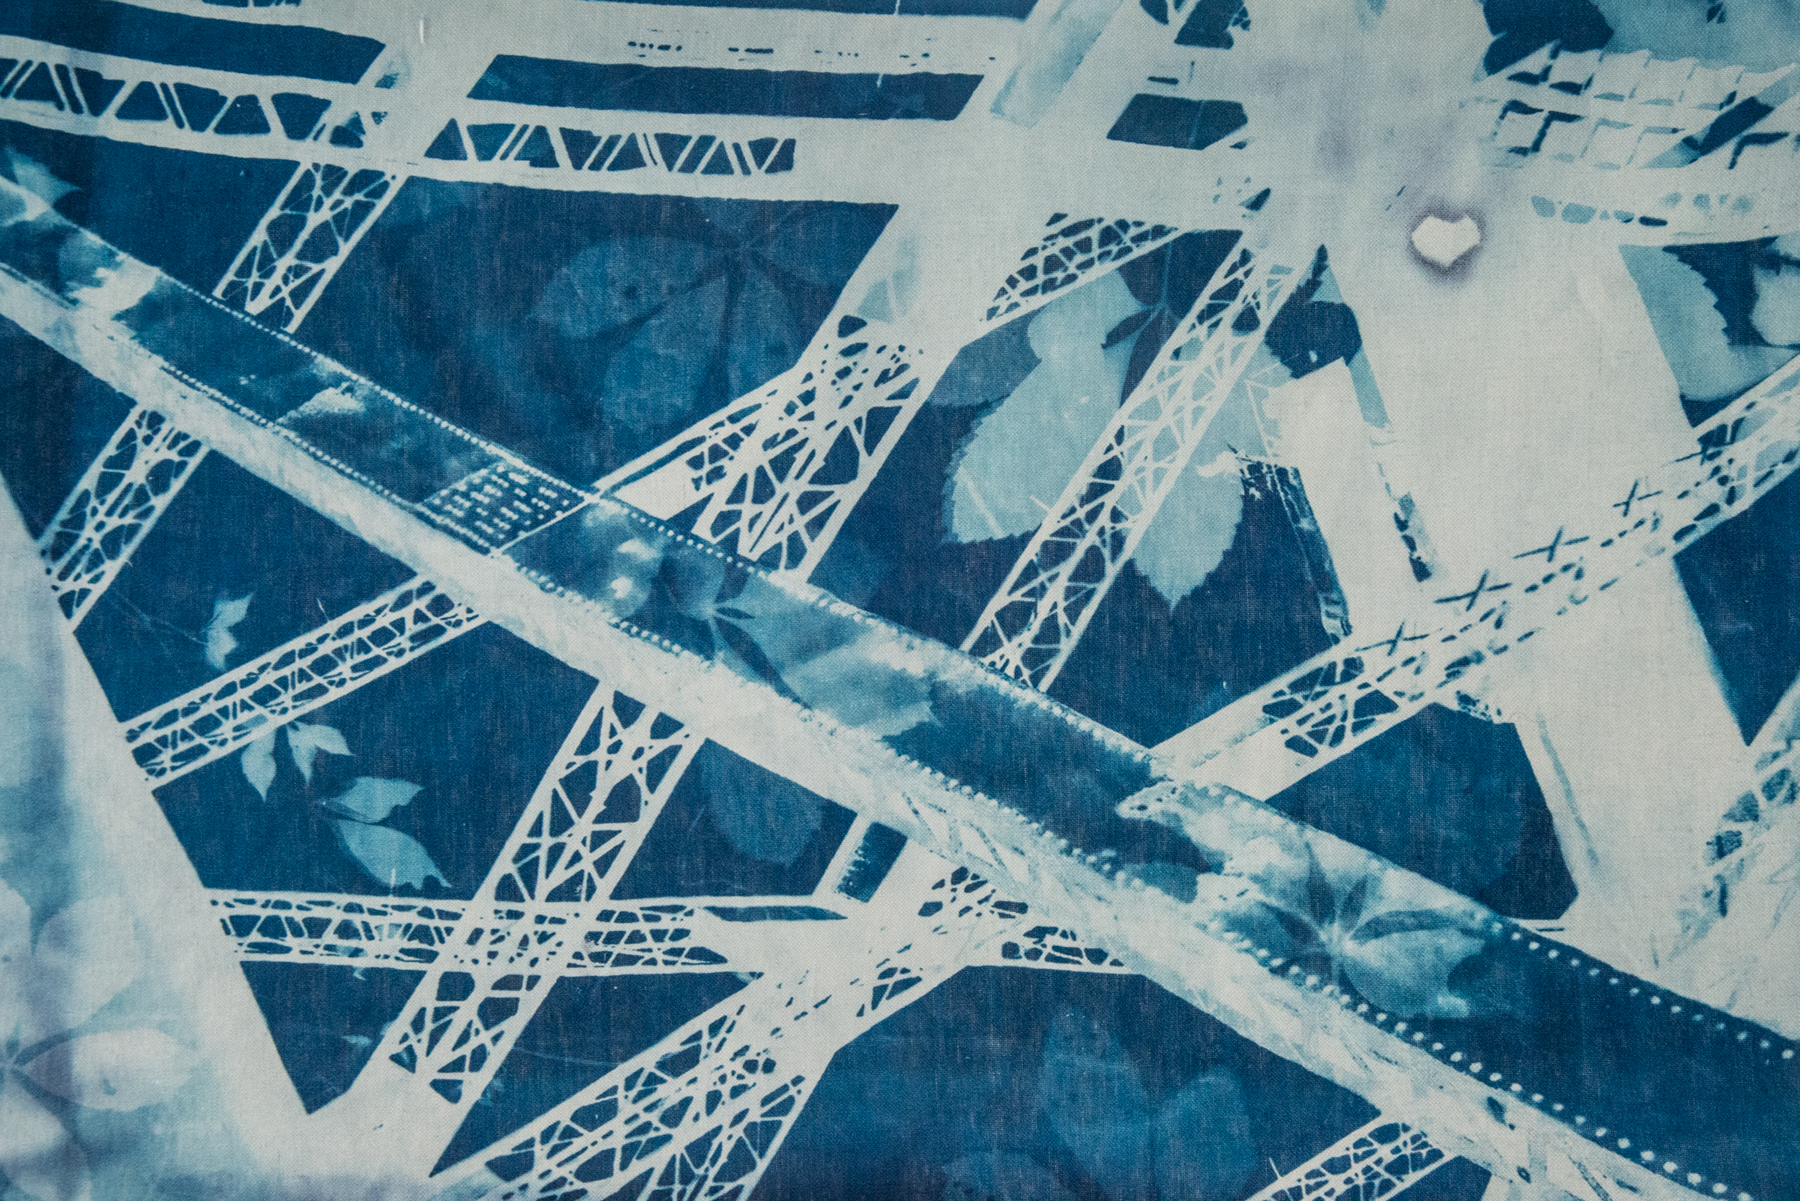  Marie Craig,  Harbour Bridge 3,  cyanotype on linen, stretched over canvas, 24x36 